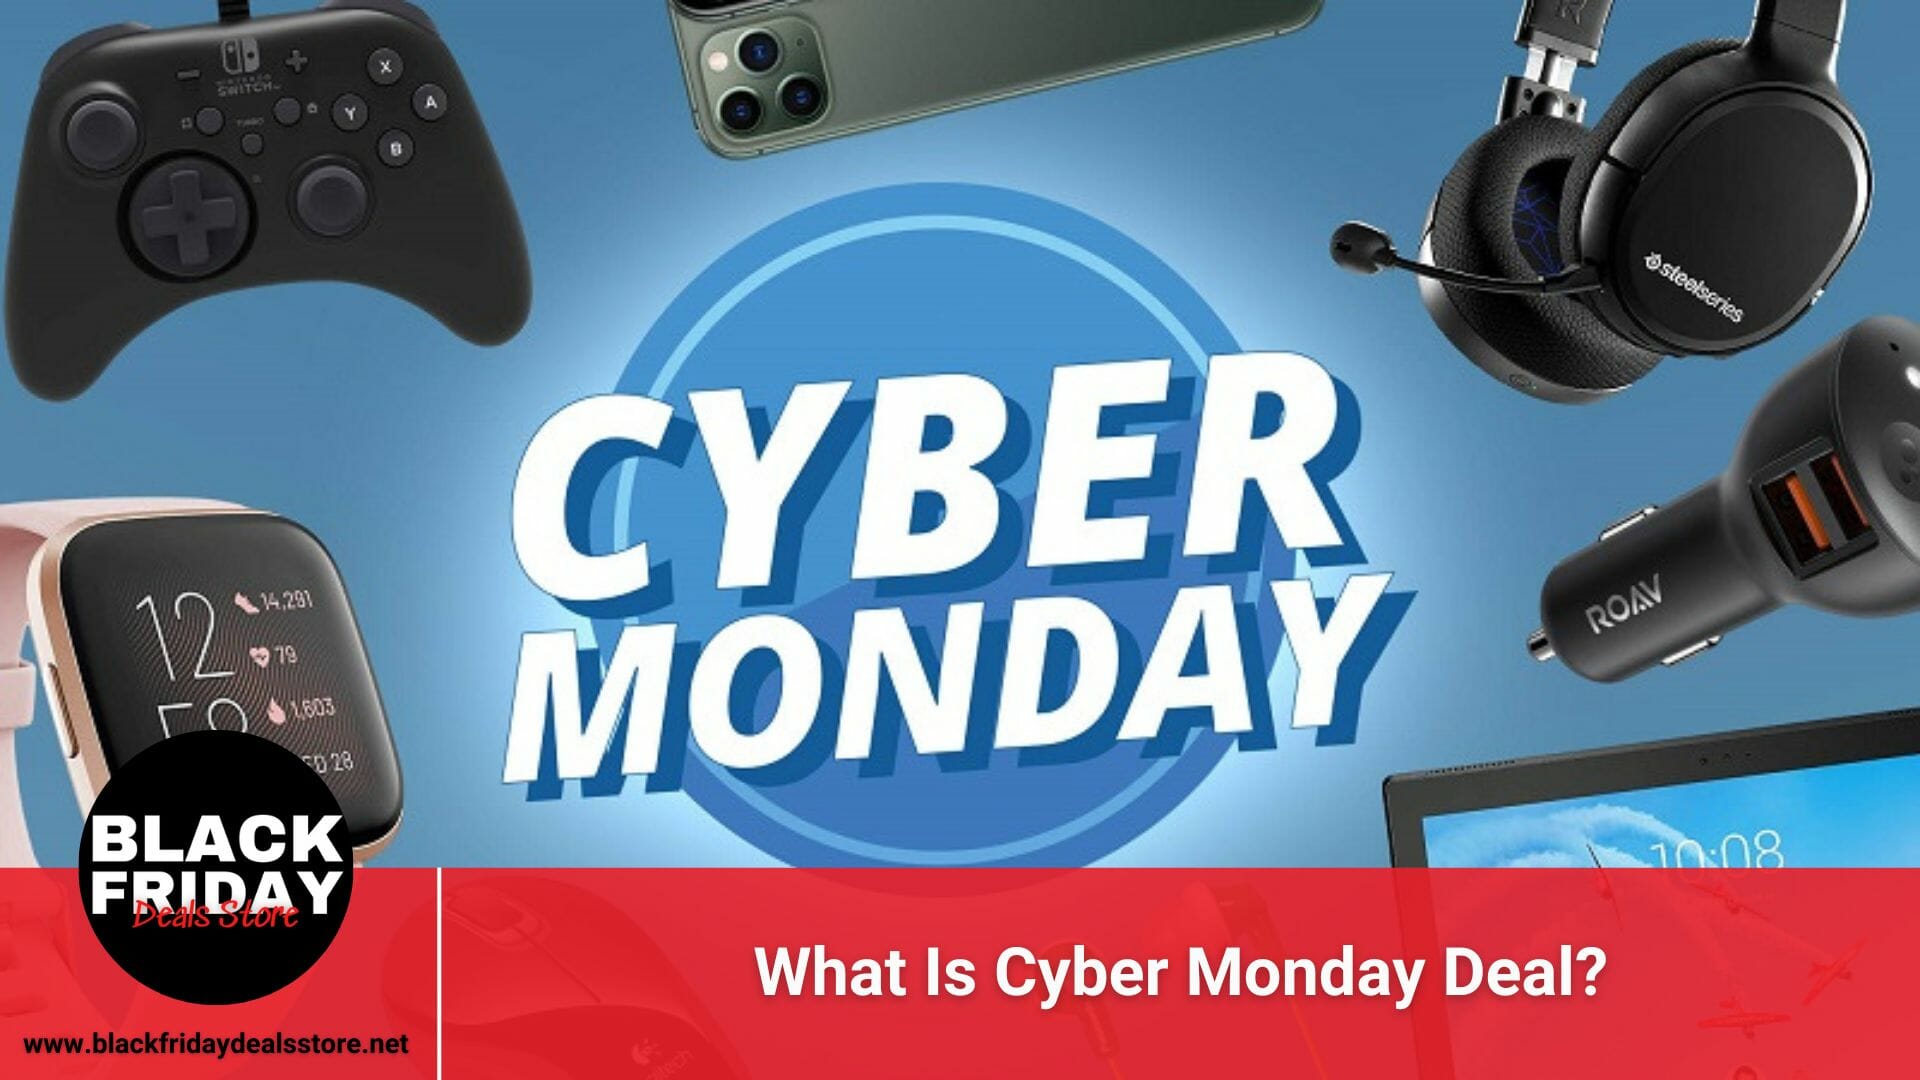 What Is Cyber Monday Deal